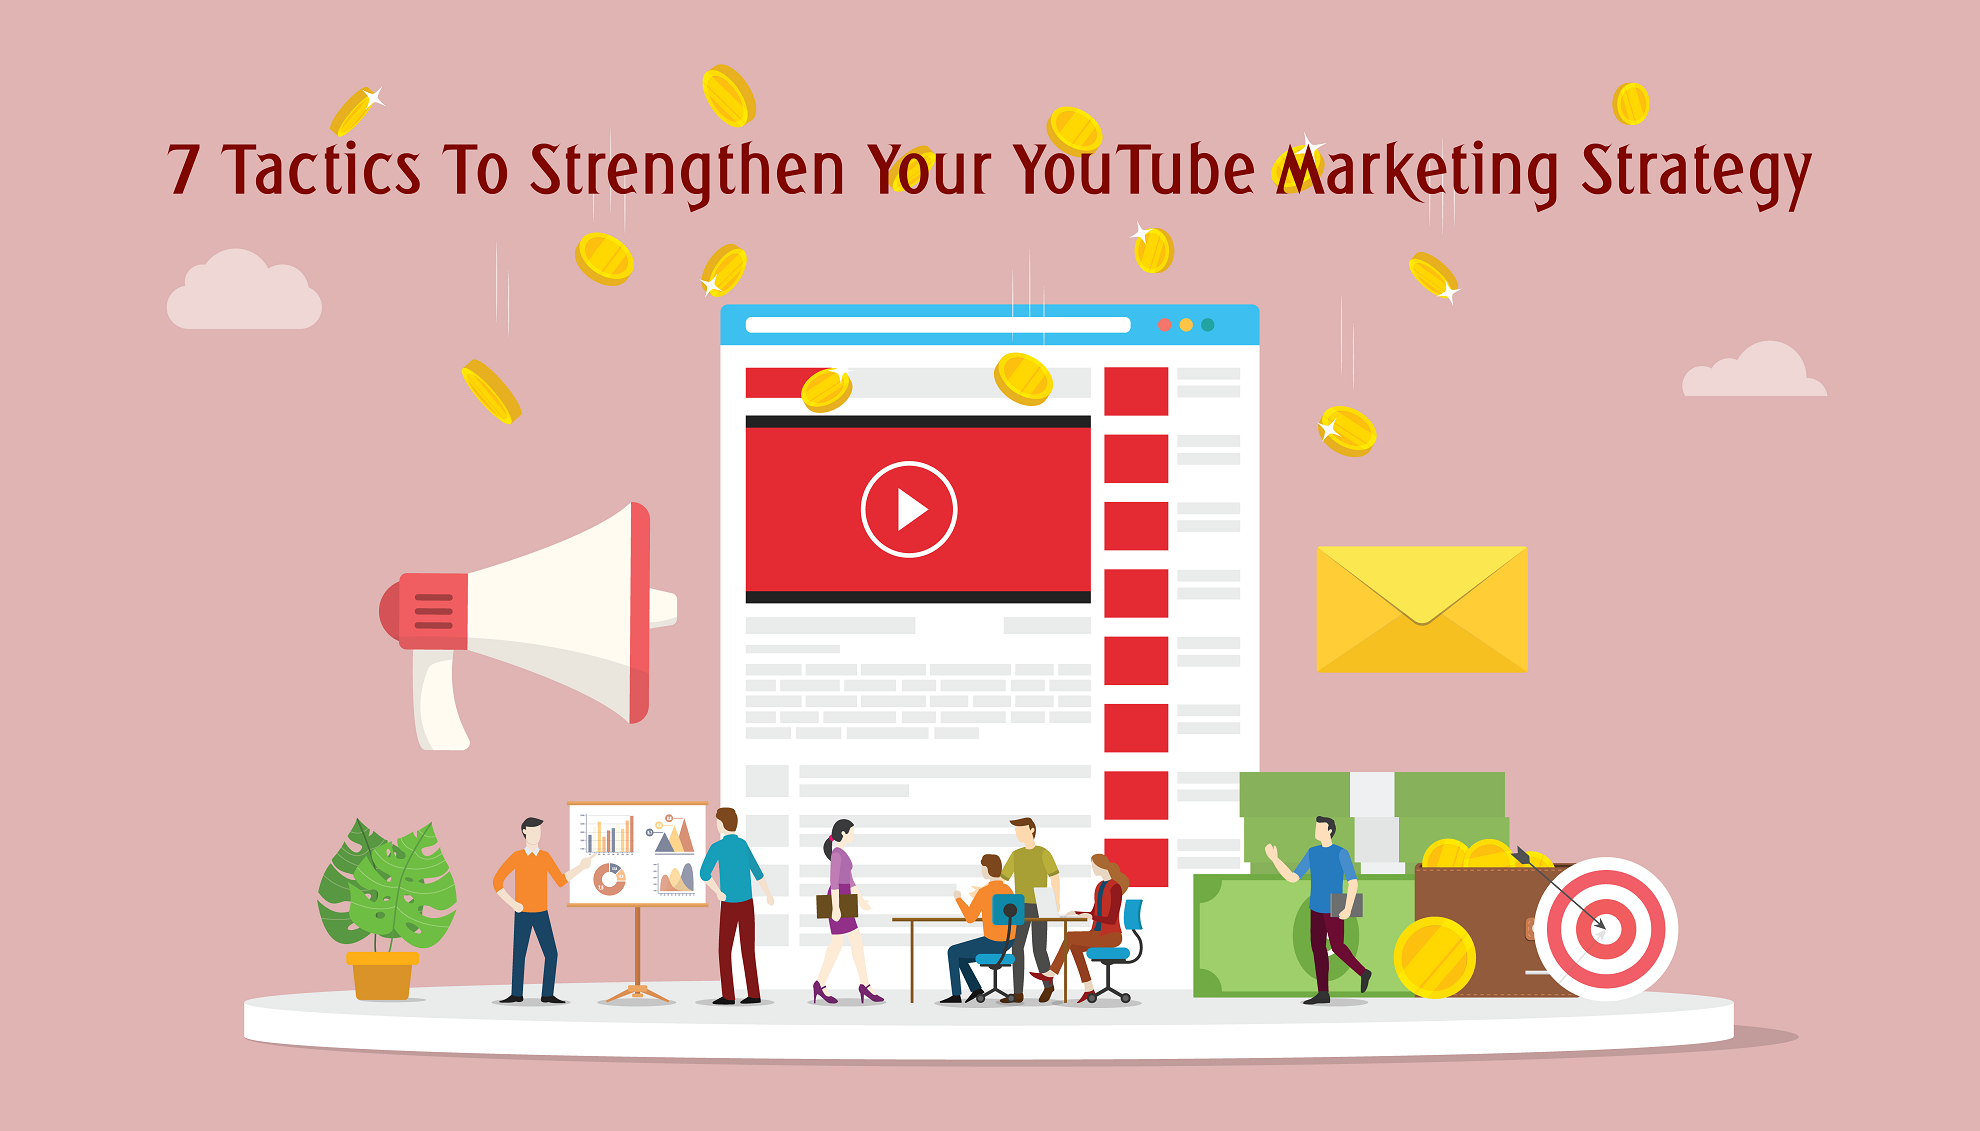 7 Tactics To Strengthen Your YouTube Marketing Strategy